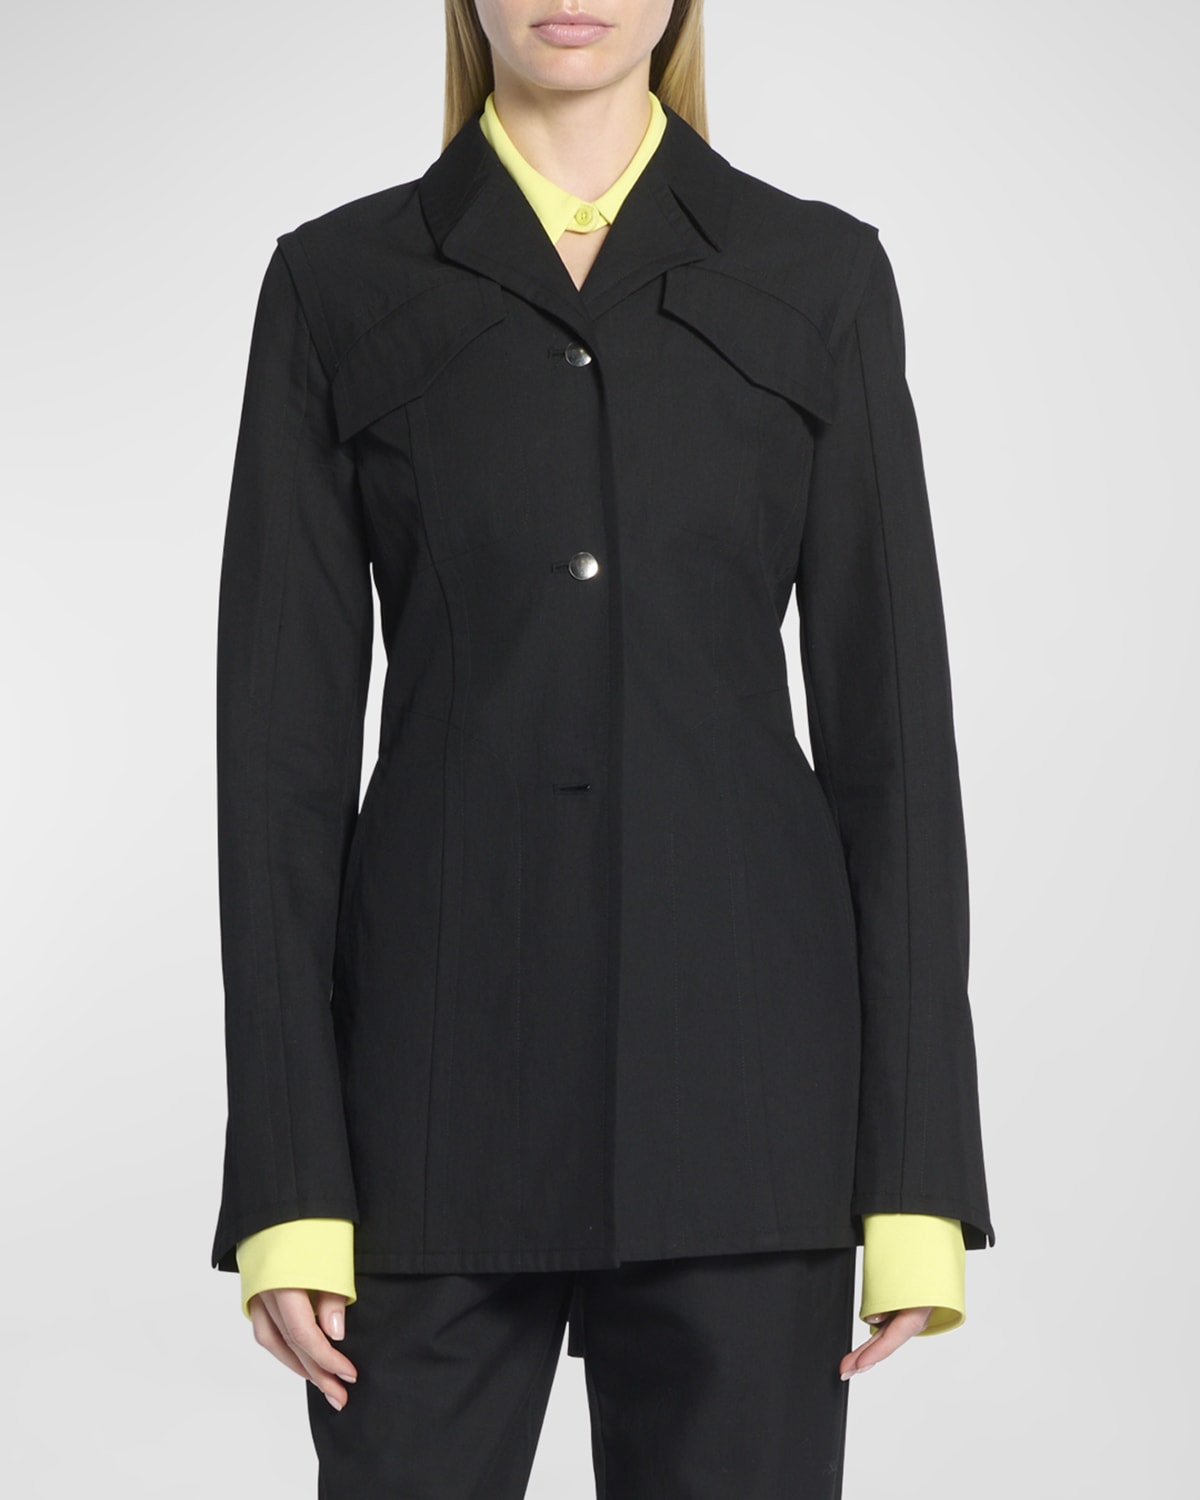 Proenza Schouler White Label Draped Suiting Jacket In Black